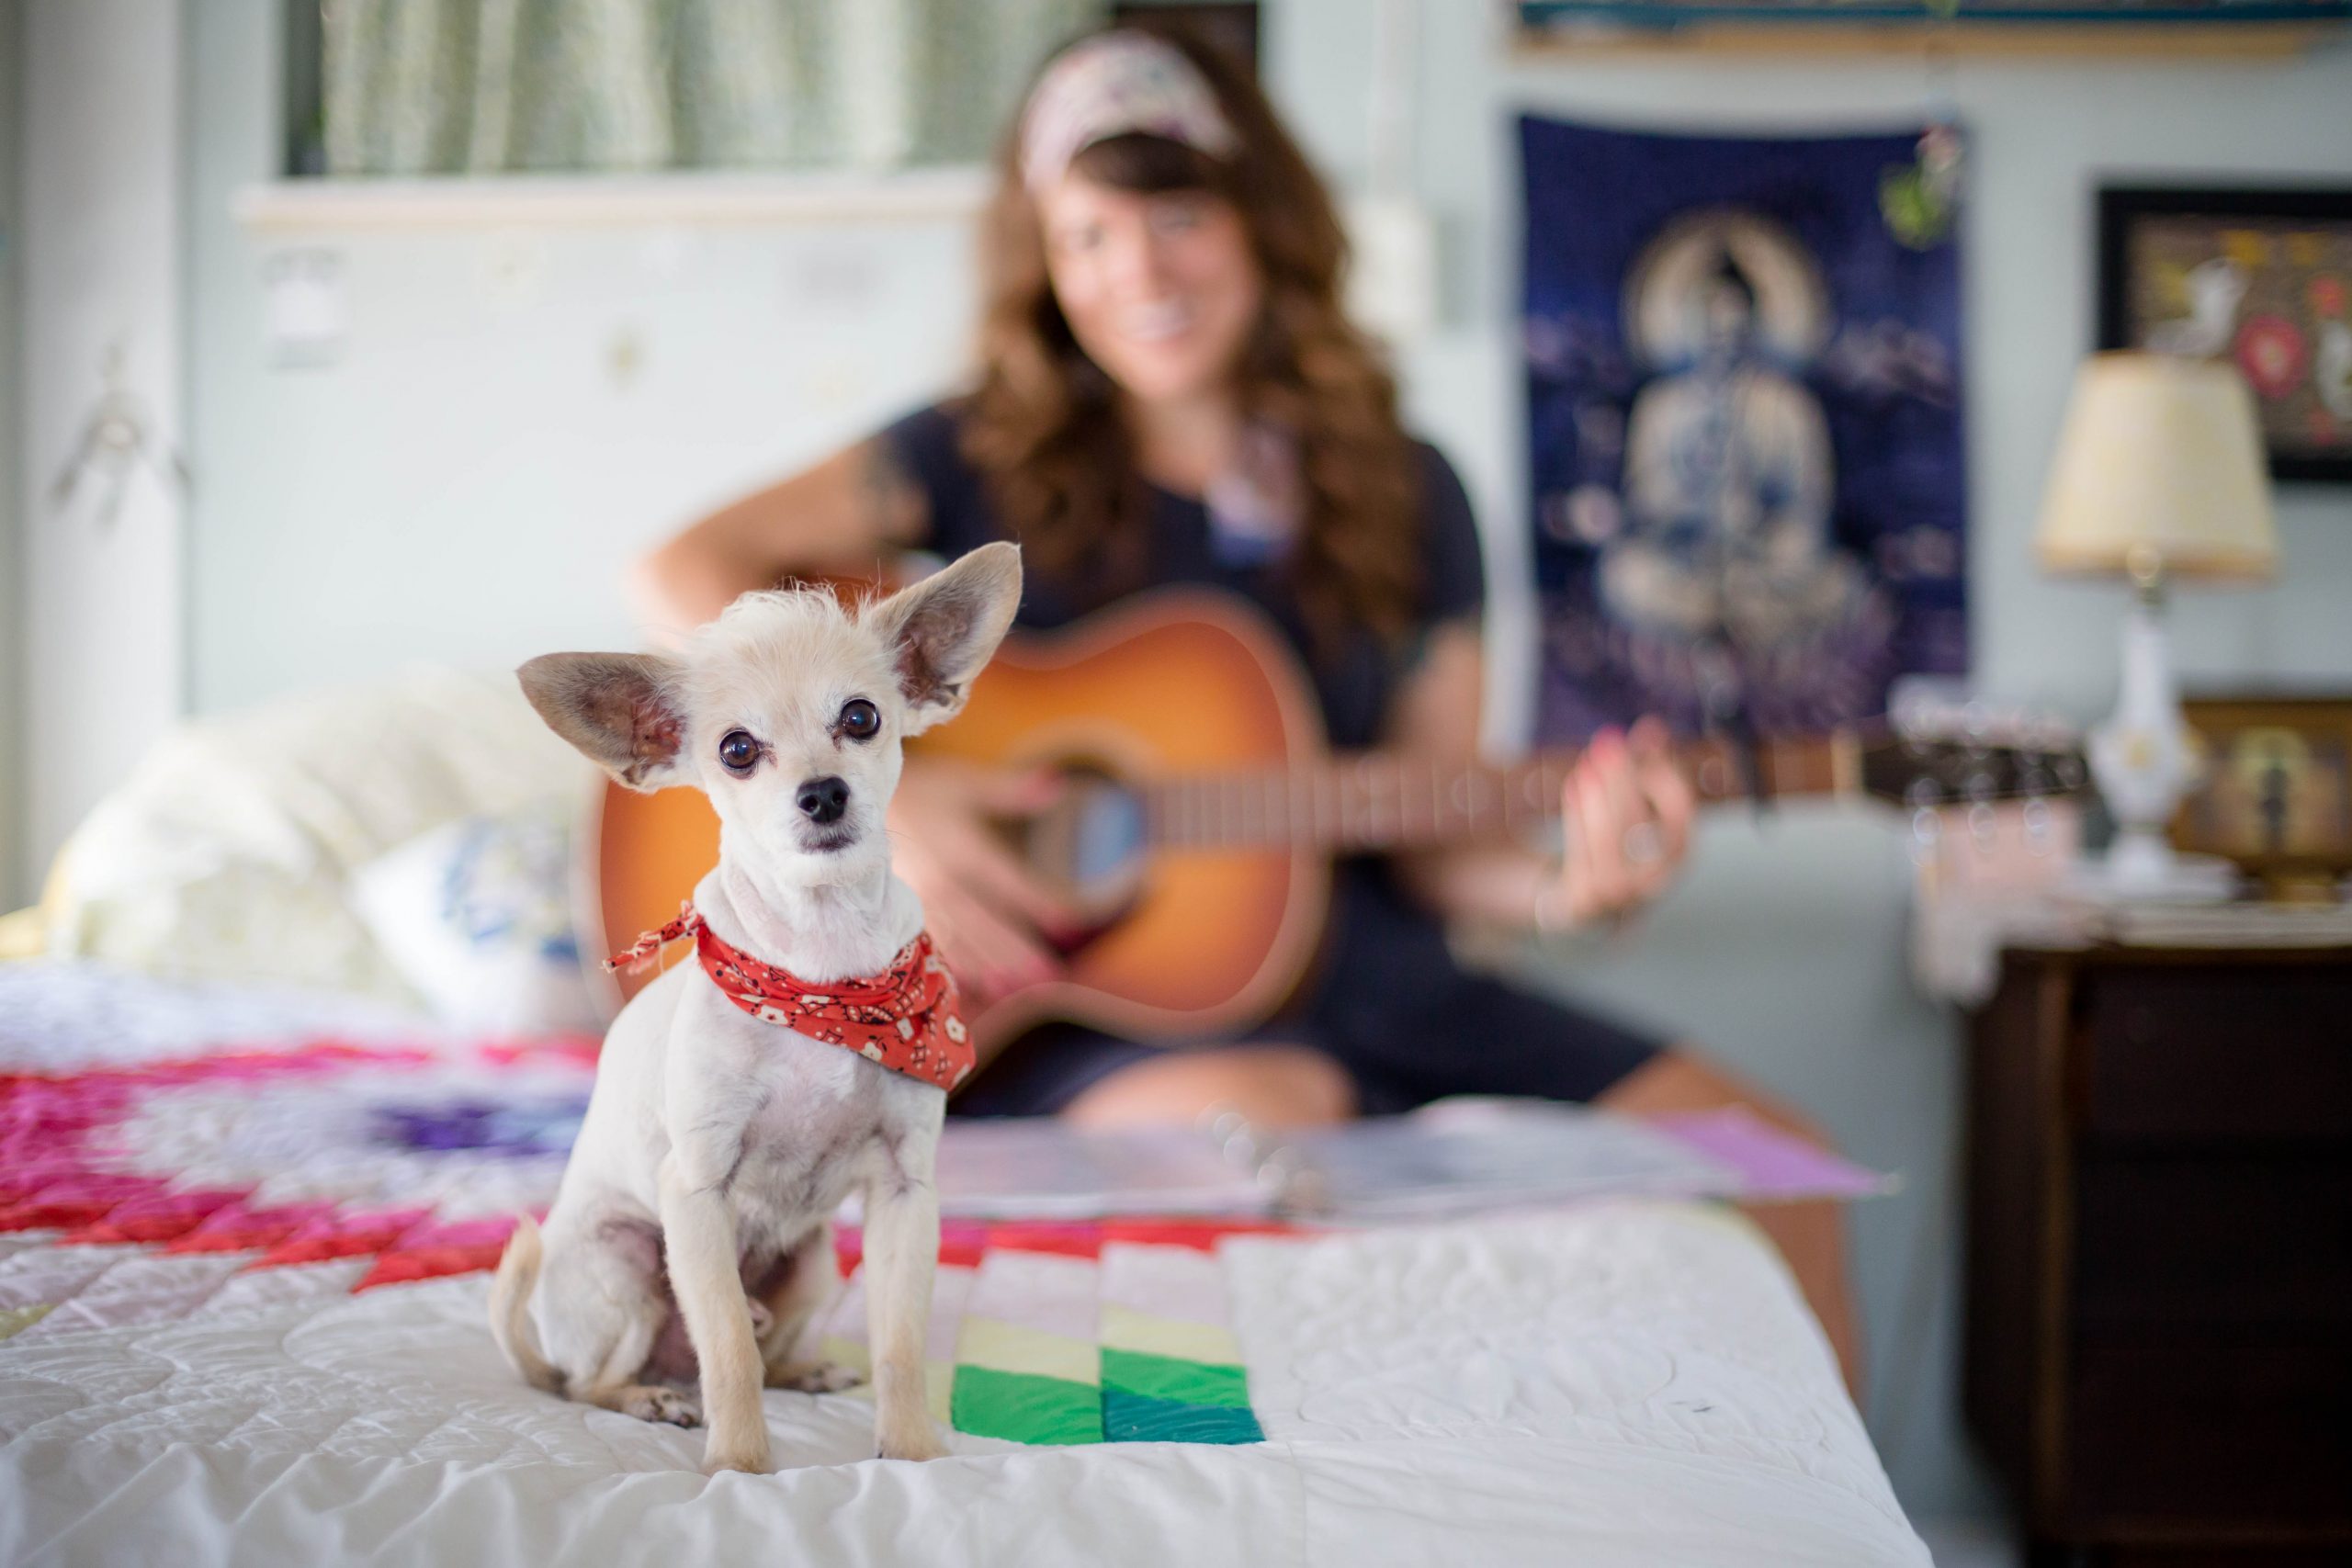 The Exelby’s grand dog, Rico, and daughter Julia playing the guitar. Rico passed over the rainbow bridge in this bed he loved so much. Photo by Stephanie Lynn Warga / Tiny House Photo.